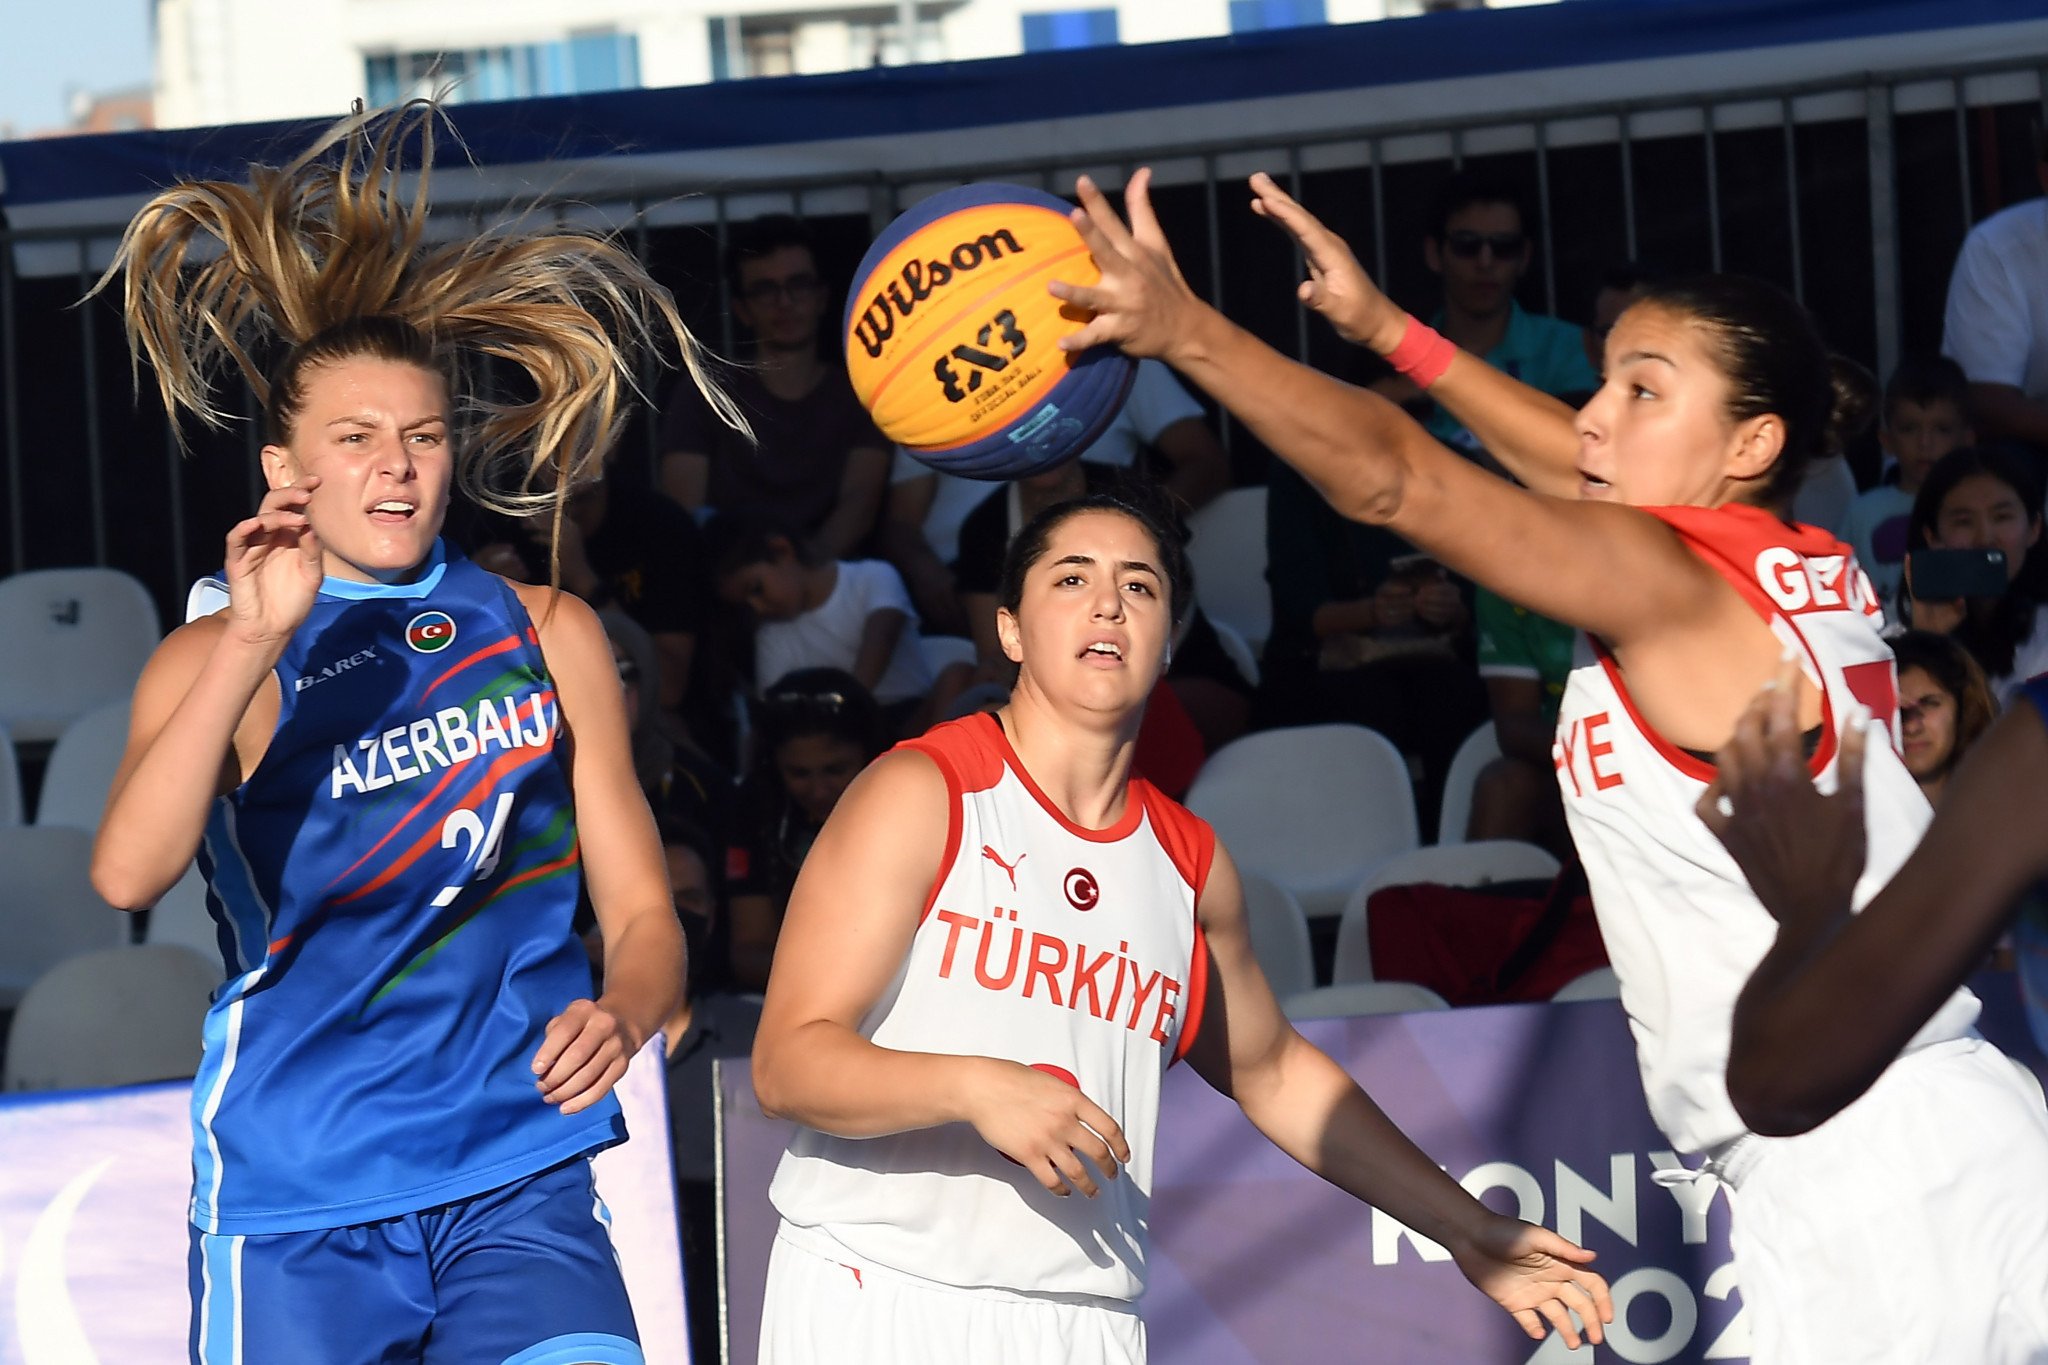 3x3 basketball action continued with Turkey facing Azerbaijan in the women's group stages ©Konya 2021